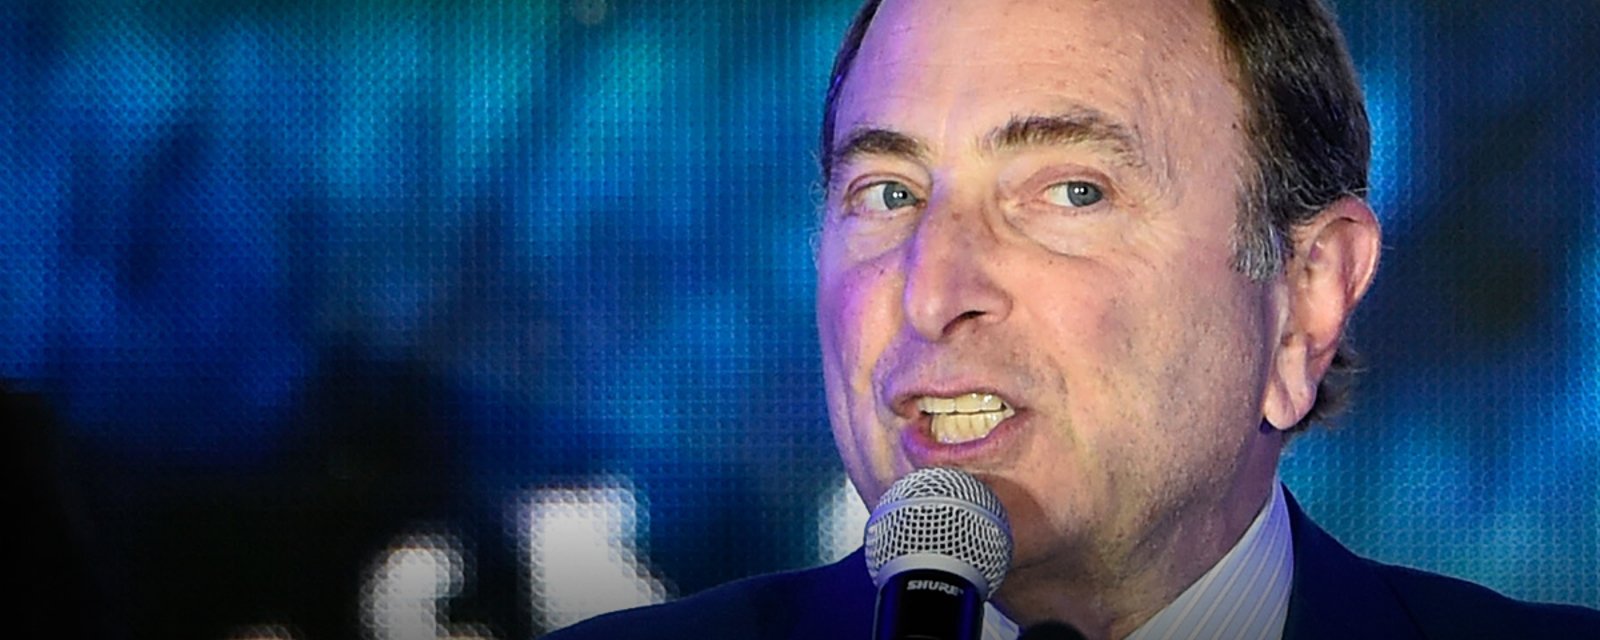 Breaking: Bettman categorically shuts down controversial change to playoff rules